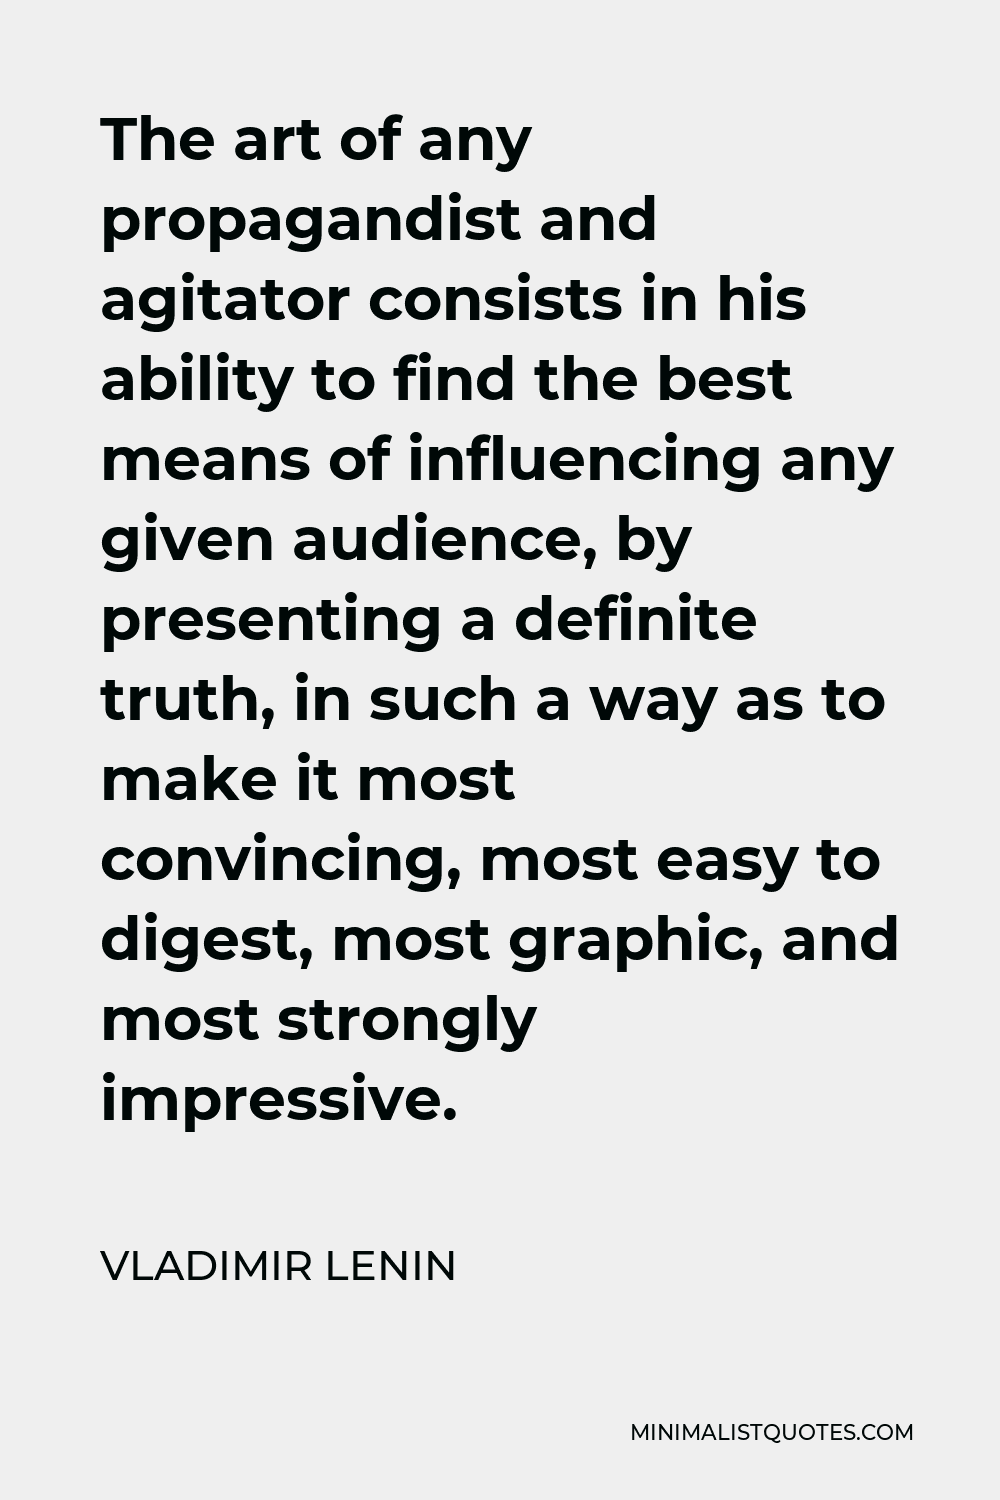 Vladimir Lenin Quote - The art of any propagandist and agitator consists in his ability to find the best means of influencing any given audience, by presenting a definite truth, in such a way as to make it most convincing, most easy to digest, most graphic, and most strongly impressive.